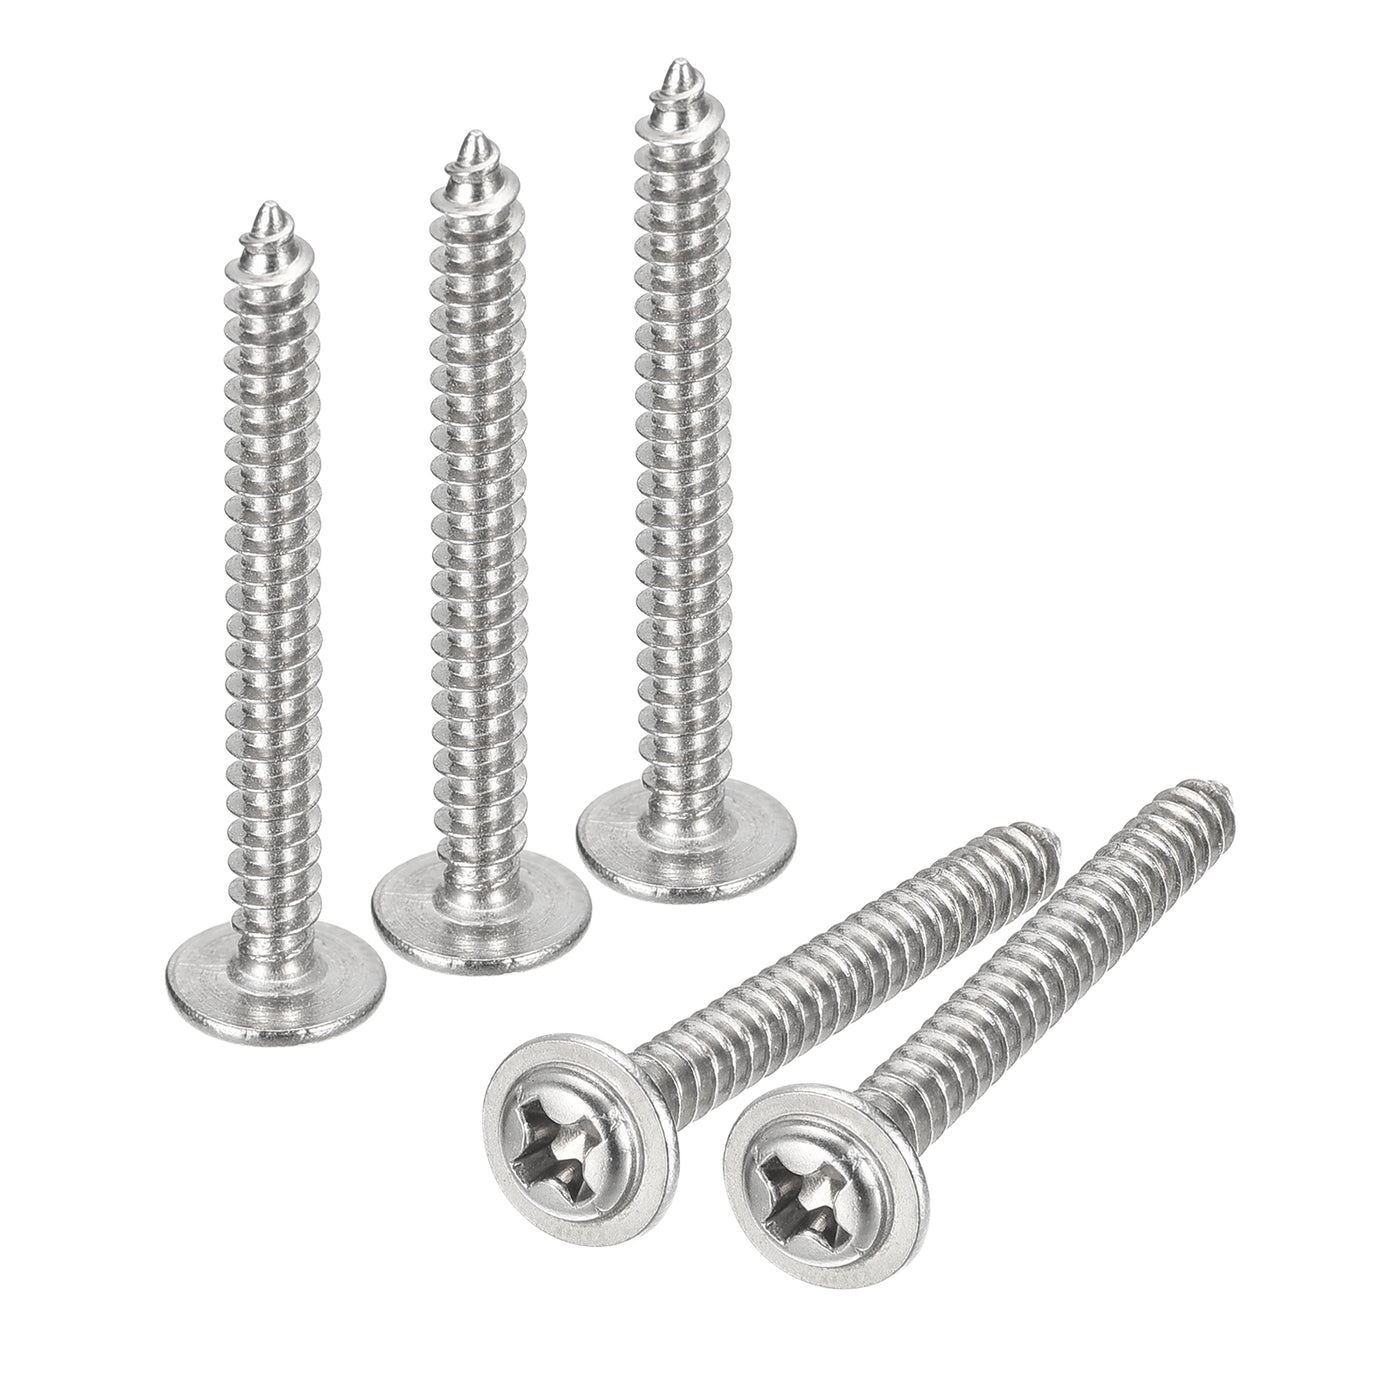 uxcell Uxcell ST3x25mm Phillips Pan Head Self-tapping Screw with Washer, 100pcs - 304 Stainless Steel Wood Screw Full Thread (Silver)